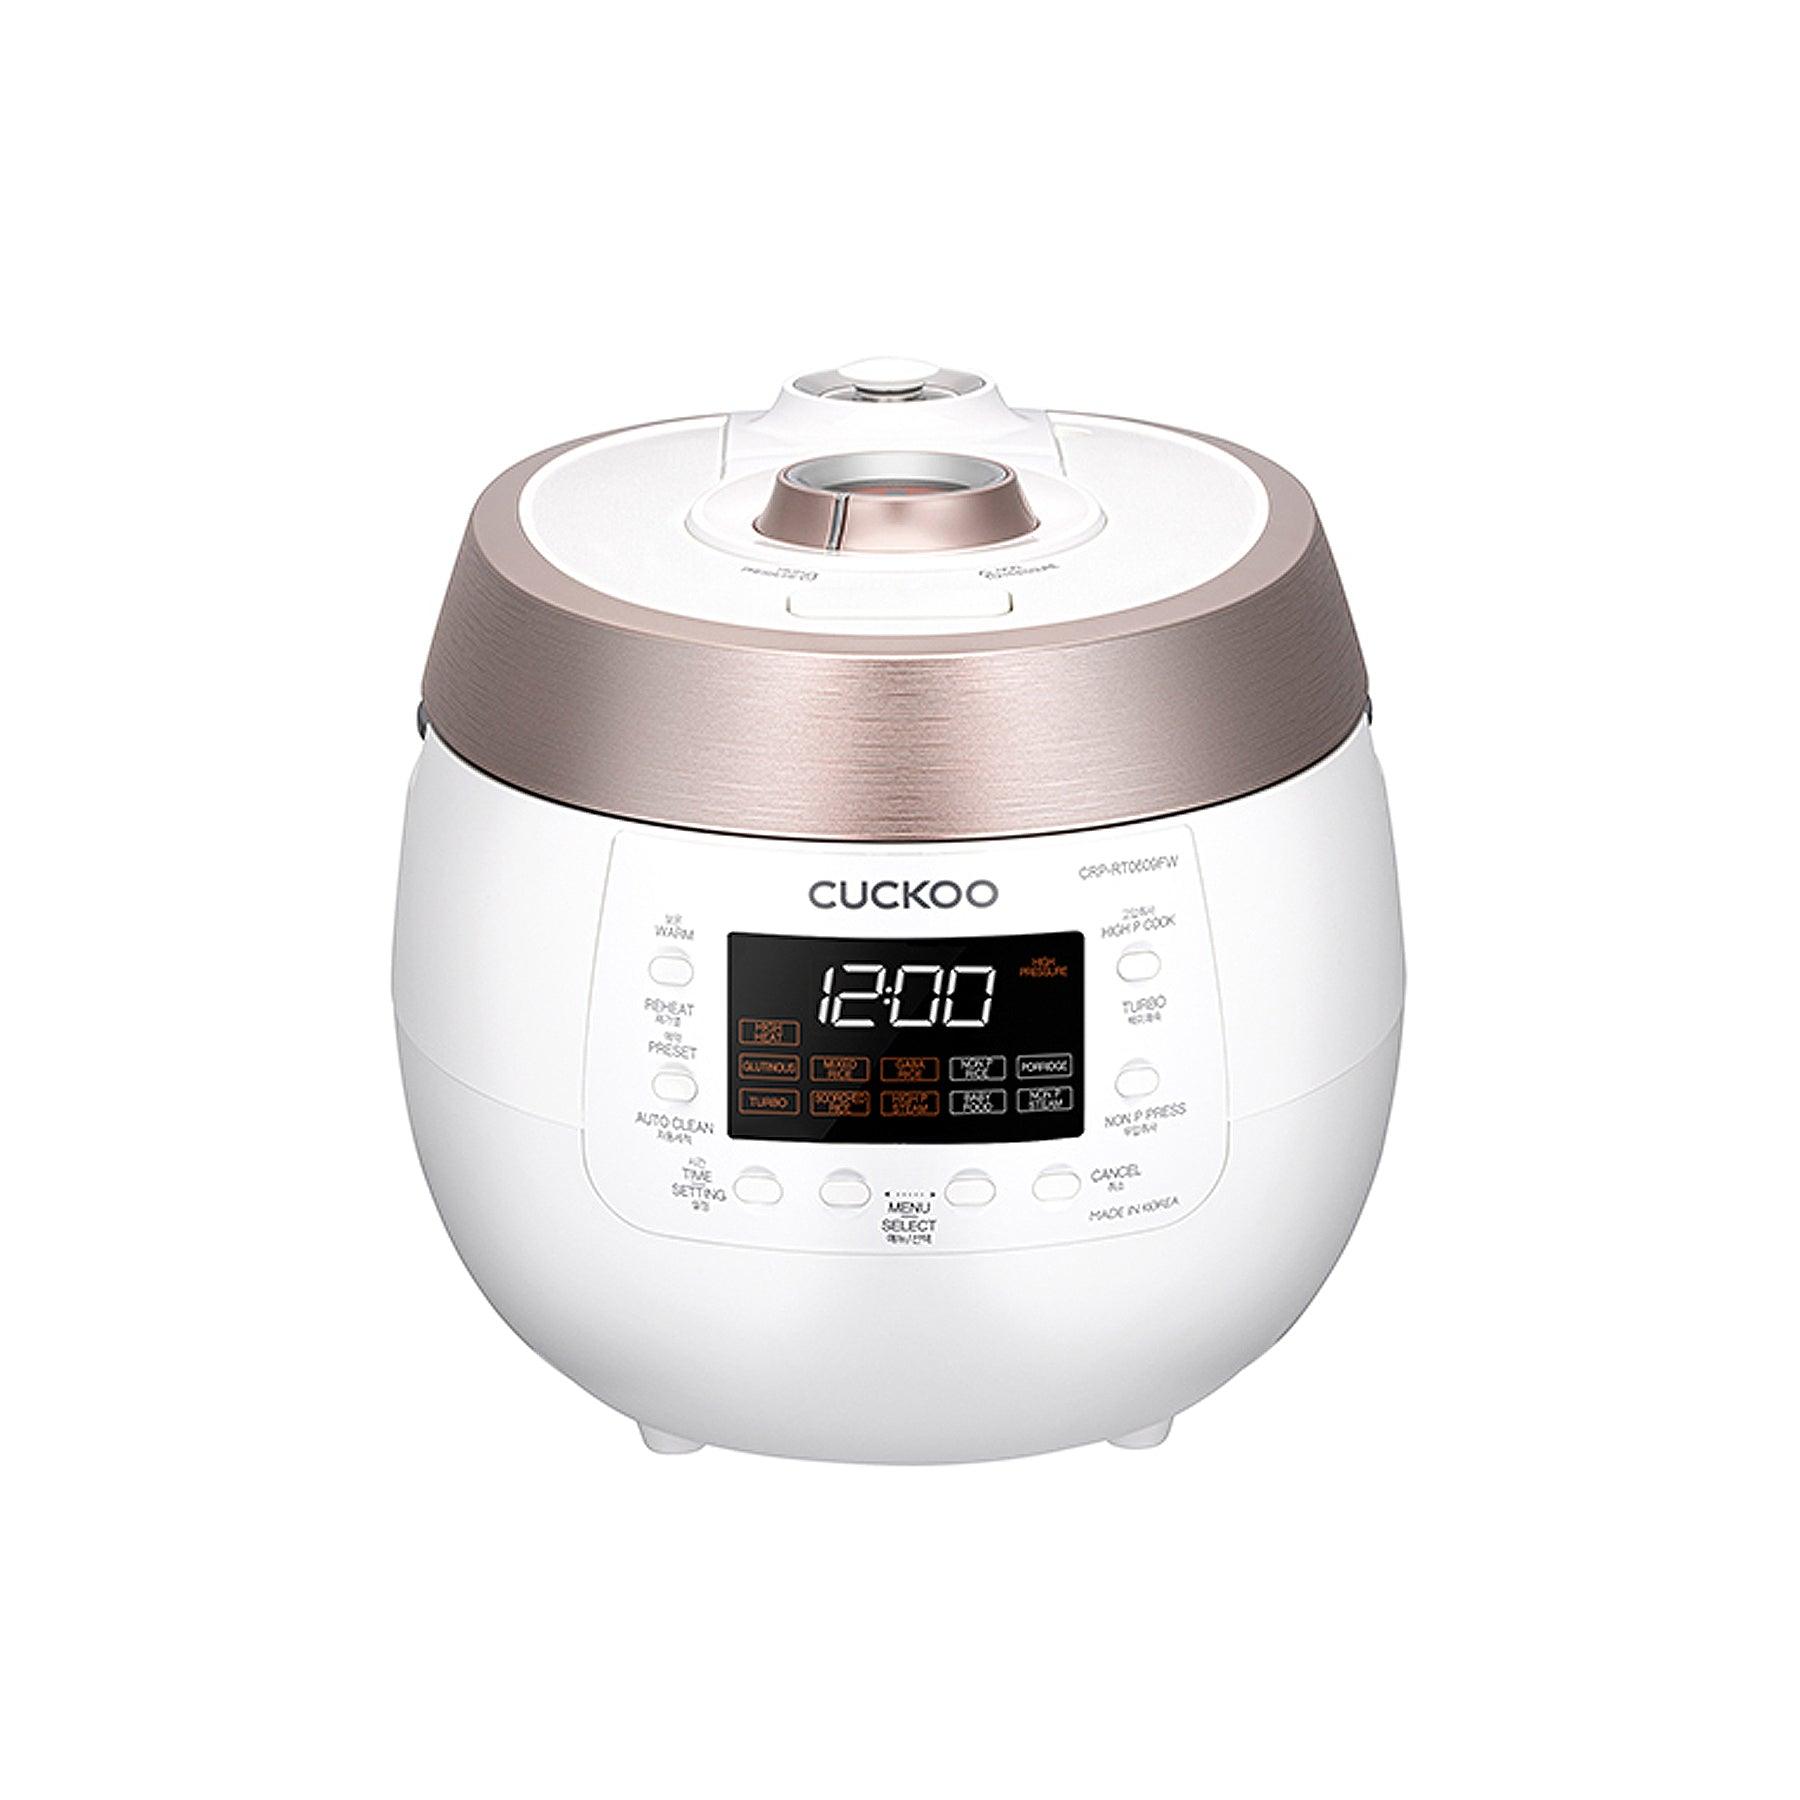 Cuckoo IH Twin Pressure Rice Cooker 25 Menu Options: White, Gaba, Scorched, Porridge, & More, User-Friendly LED Display, 10 Cup / 2.5 qt. (Uncooked)